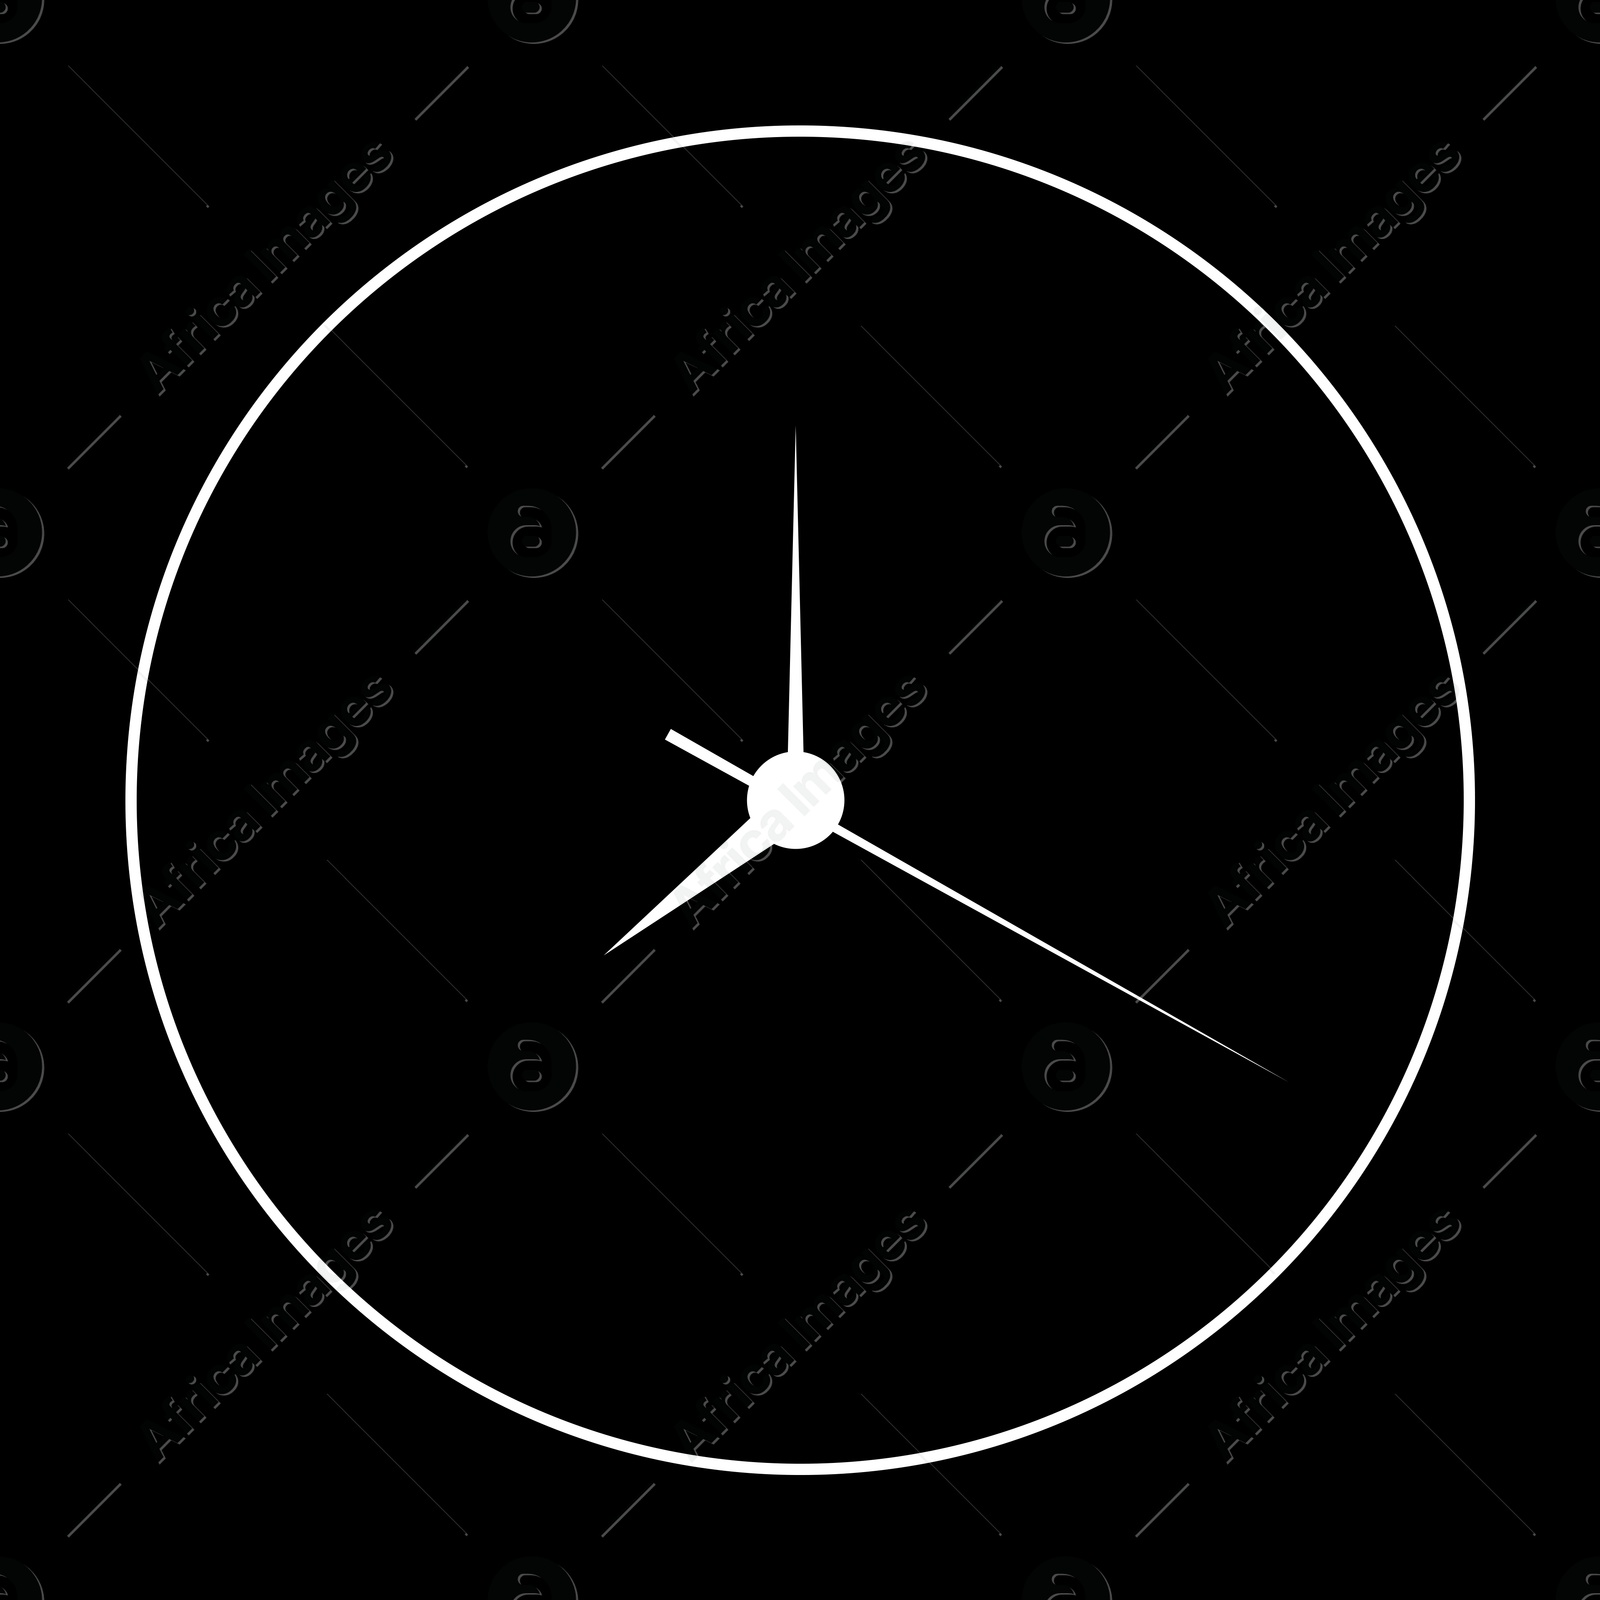 Image of Clock face with hands on black background